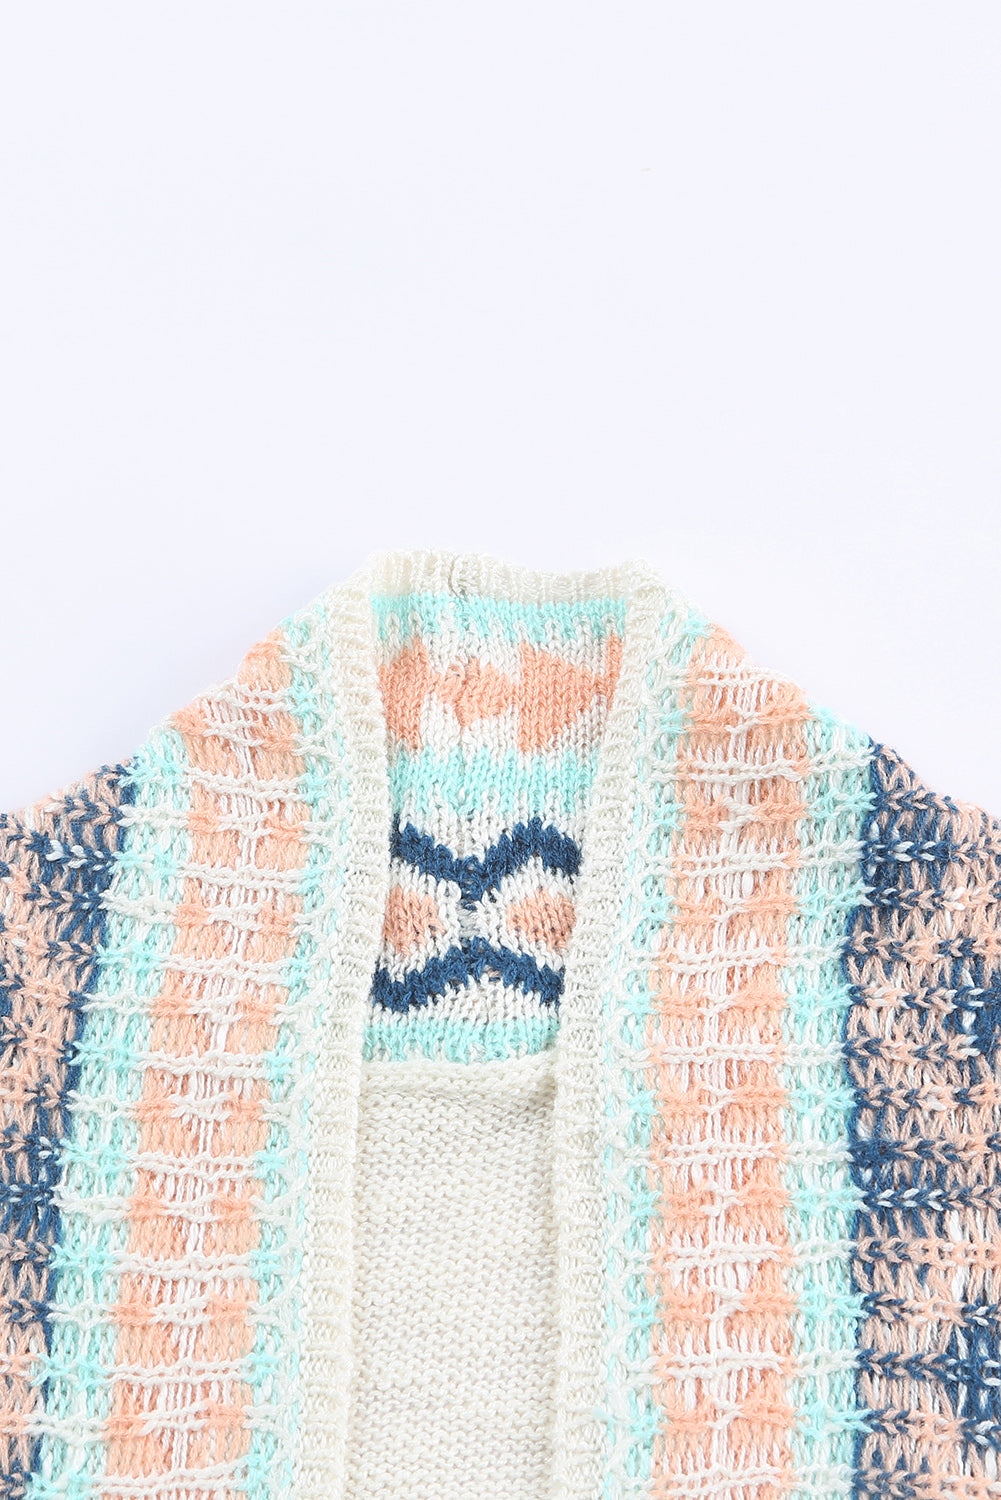 Apricot Aztec Print Open Front Cardigan Fuzzy sweater knit